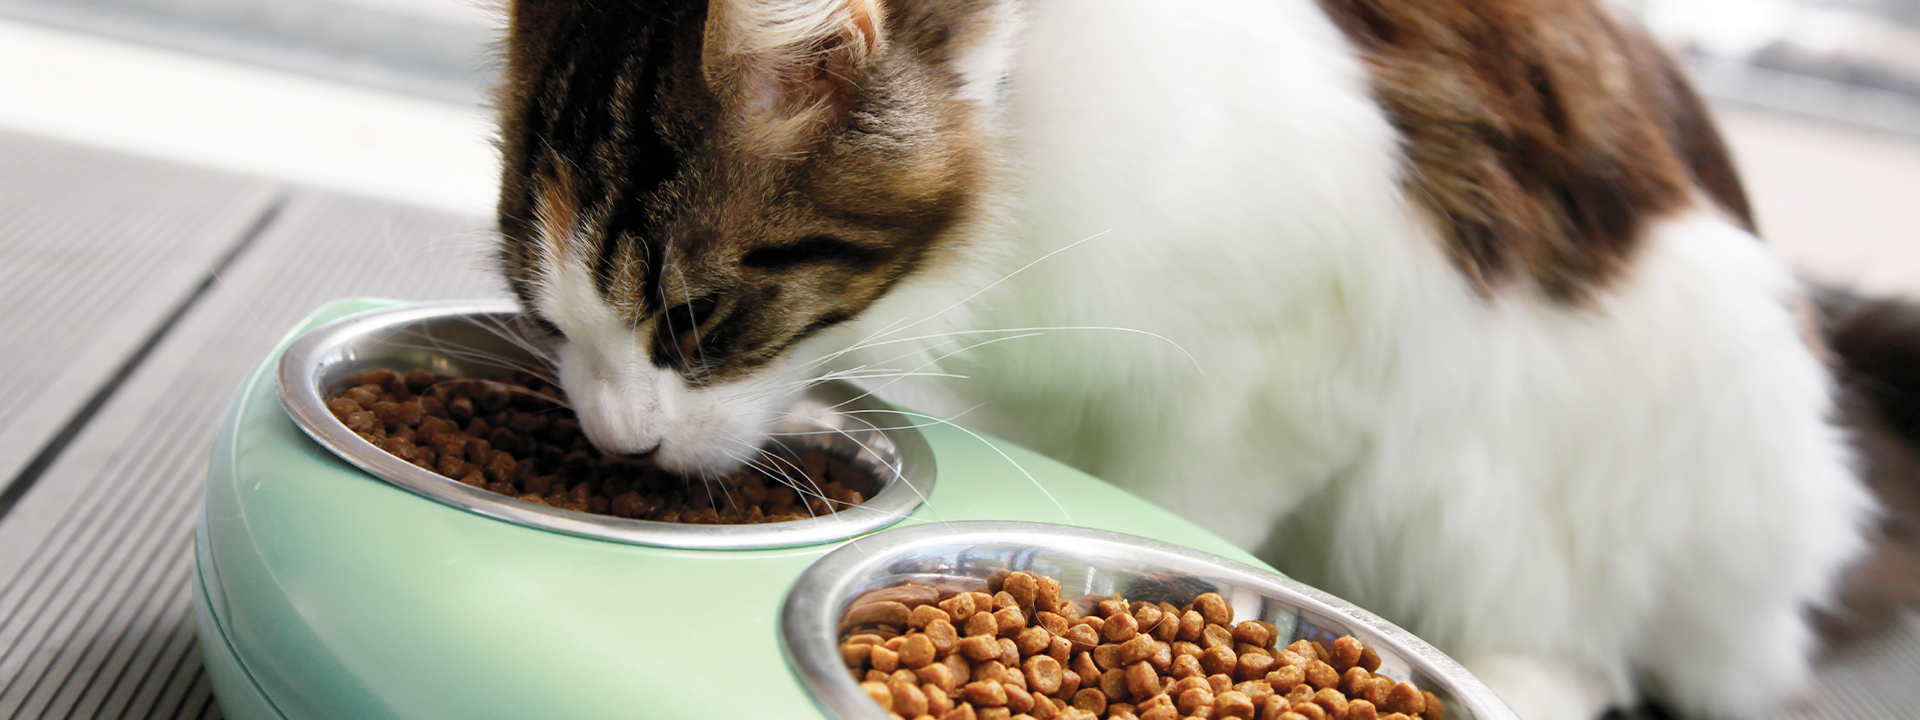 How to measure pet food palatability: methods overview